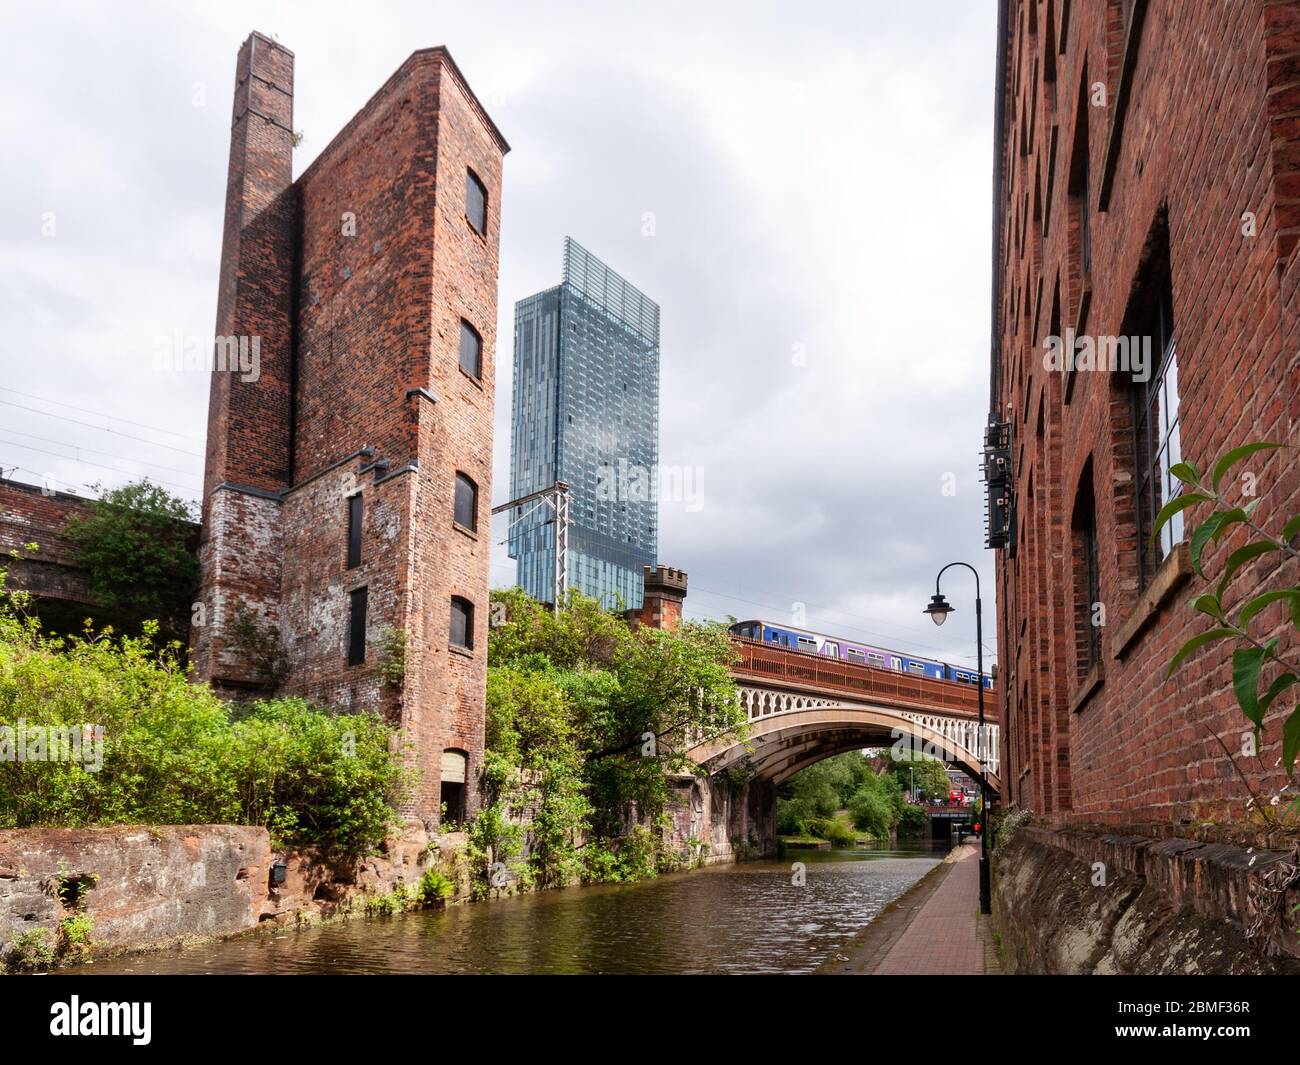 Manchester, England, UK - May 21, 2011: An industrial engine house and the modern Beetham Tower skyscraper rise above the Bridgewater Canal and railwa Stock Photo